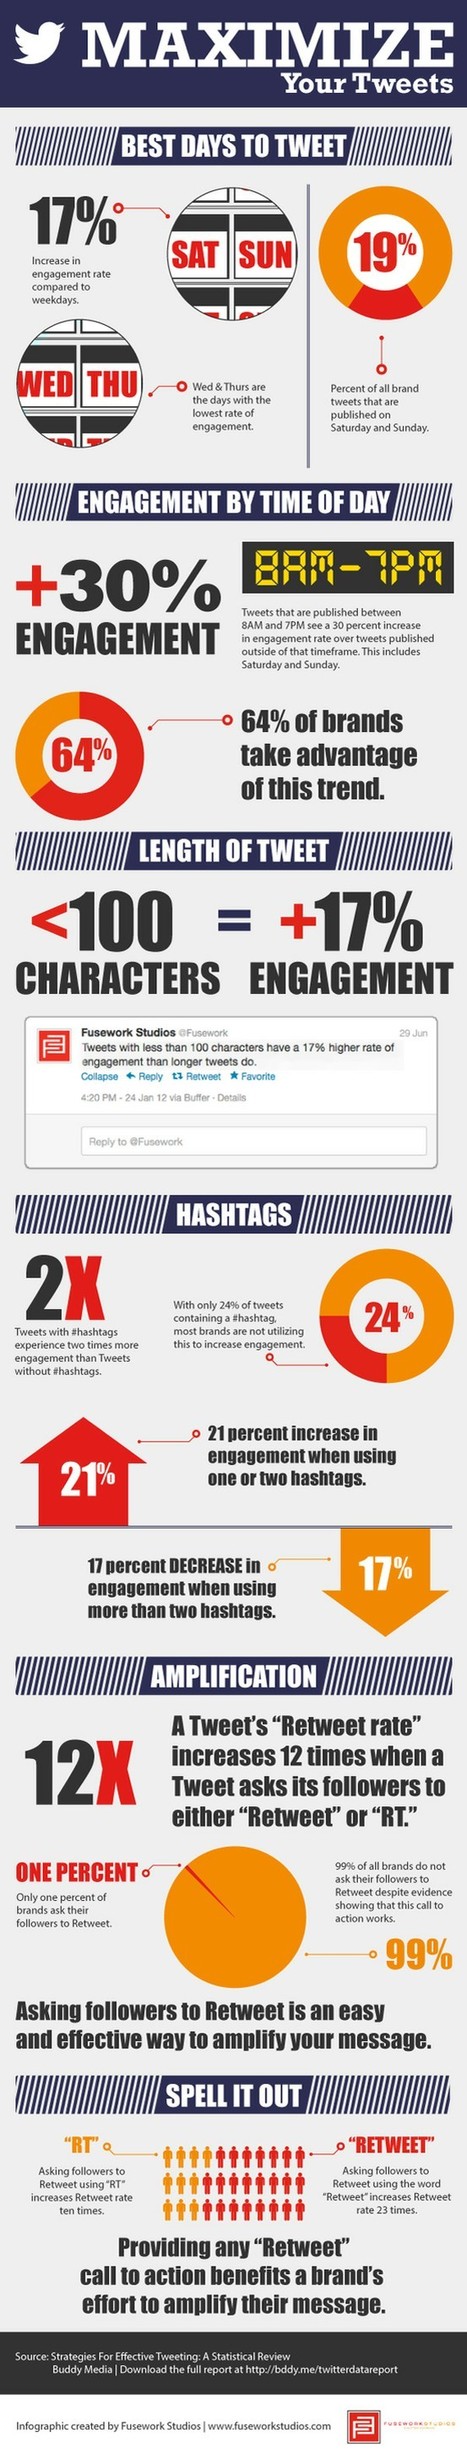 Twitter: How to optimize your tweets to increase engagement... | Intelligence Web | Scoop.it